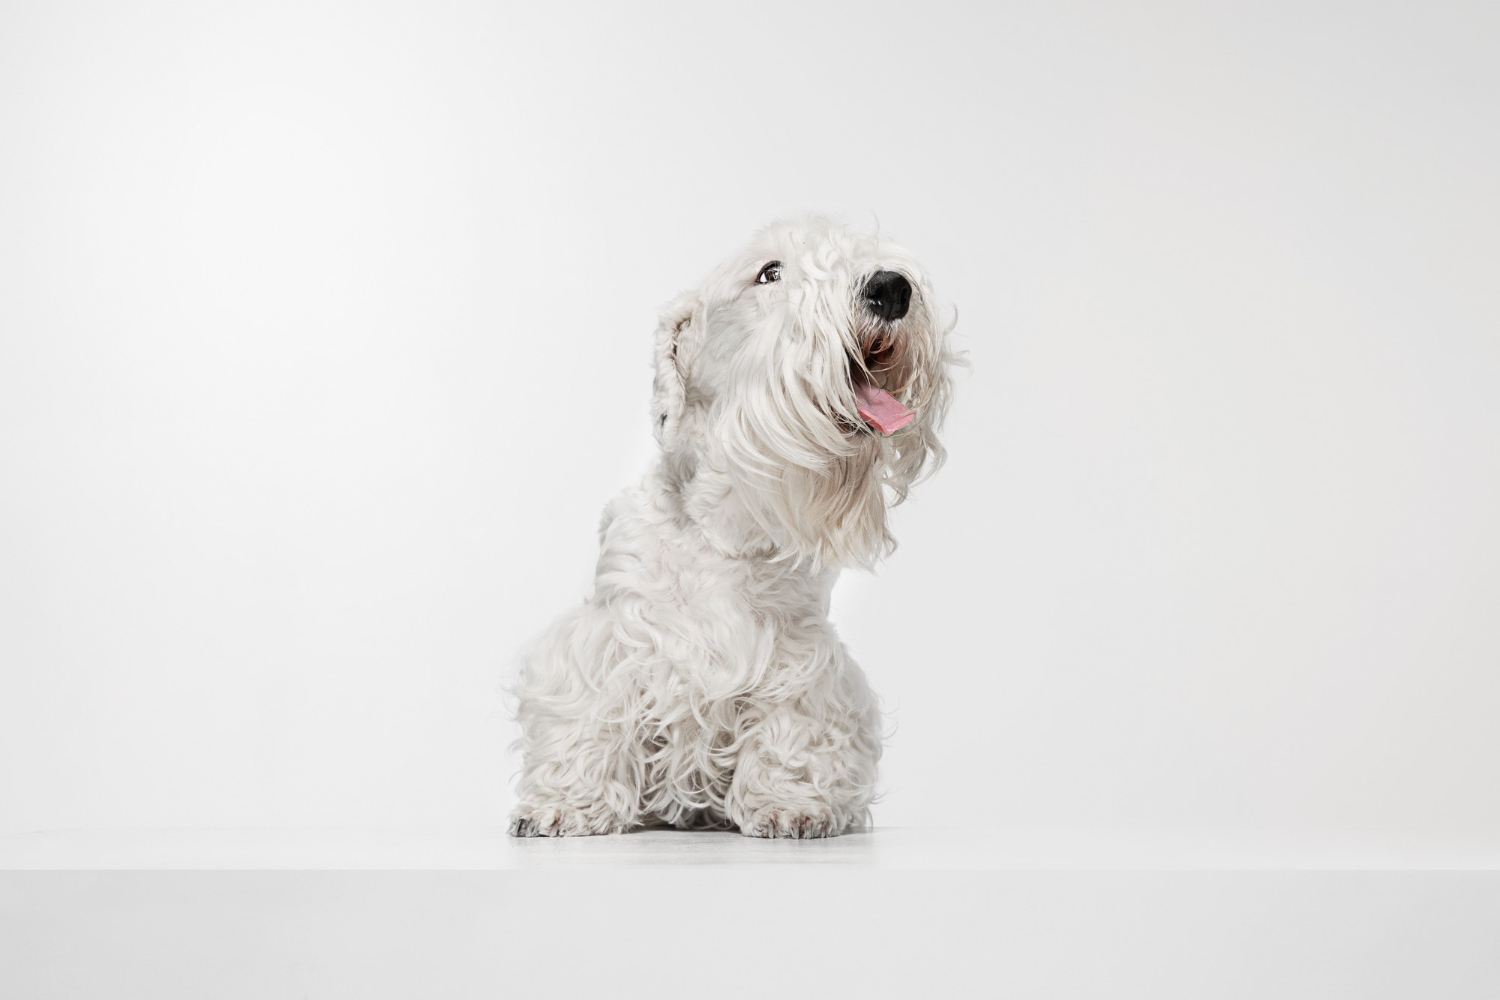 West highland white terrier - choroby